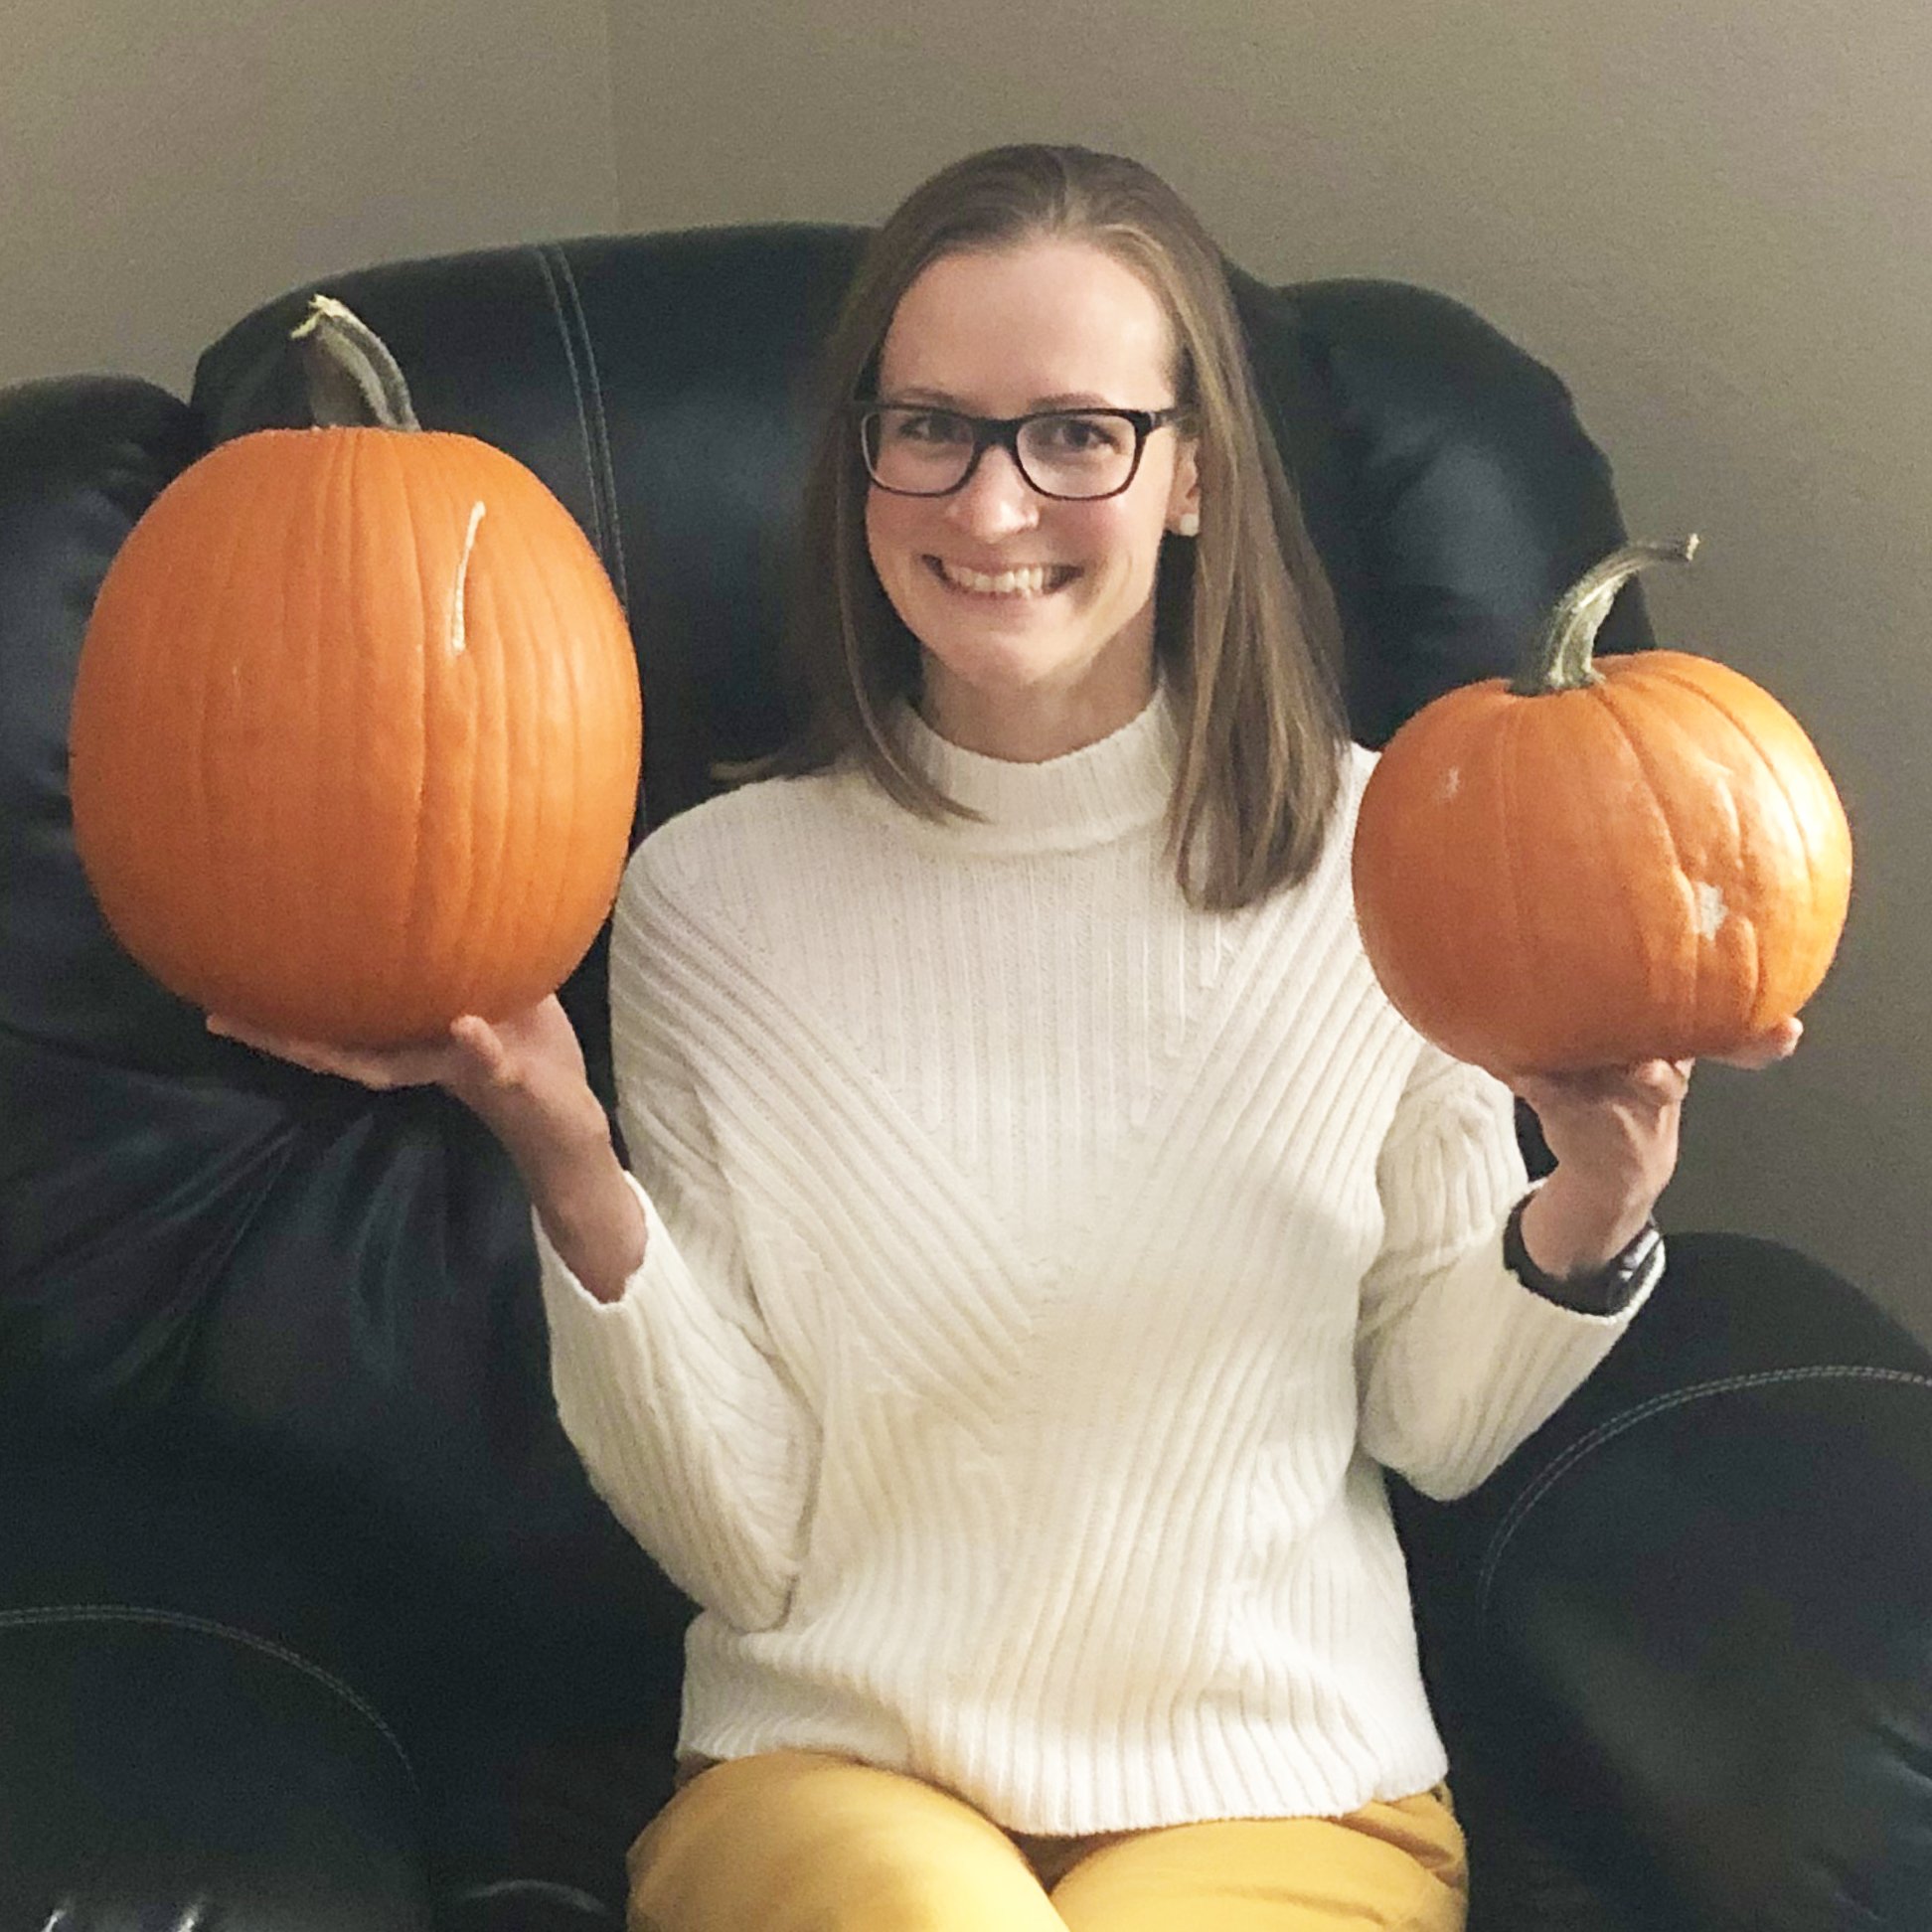 Ann, a woman with shoulder-length brown hair and dark-rimmed glasses sits in a chair and holds two pumpkins of different size